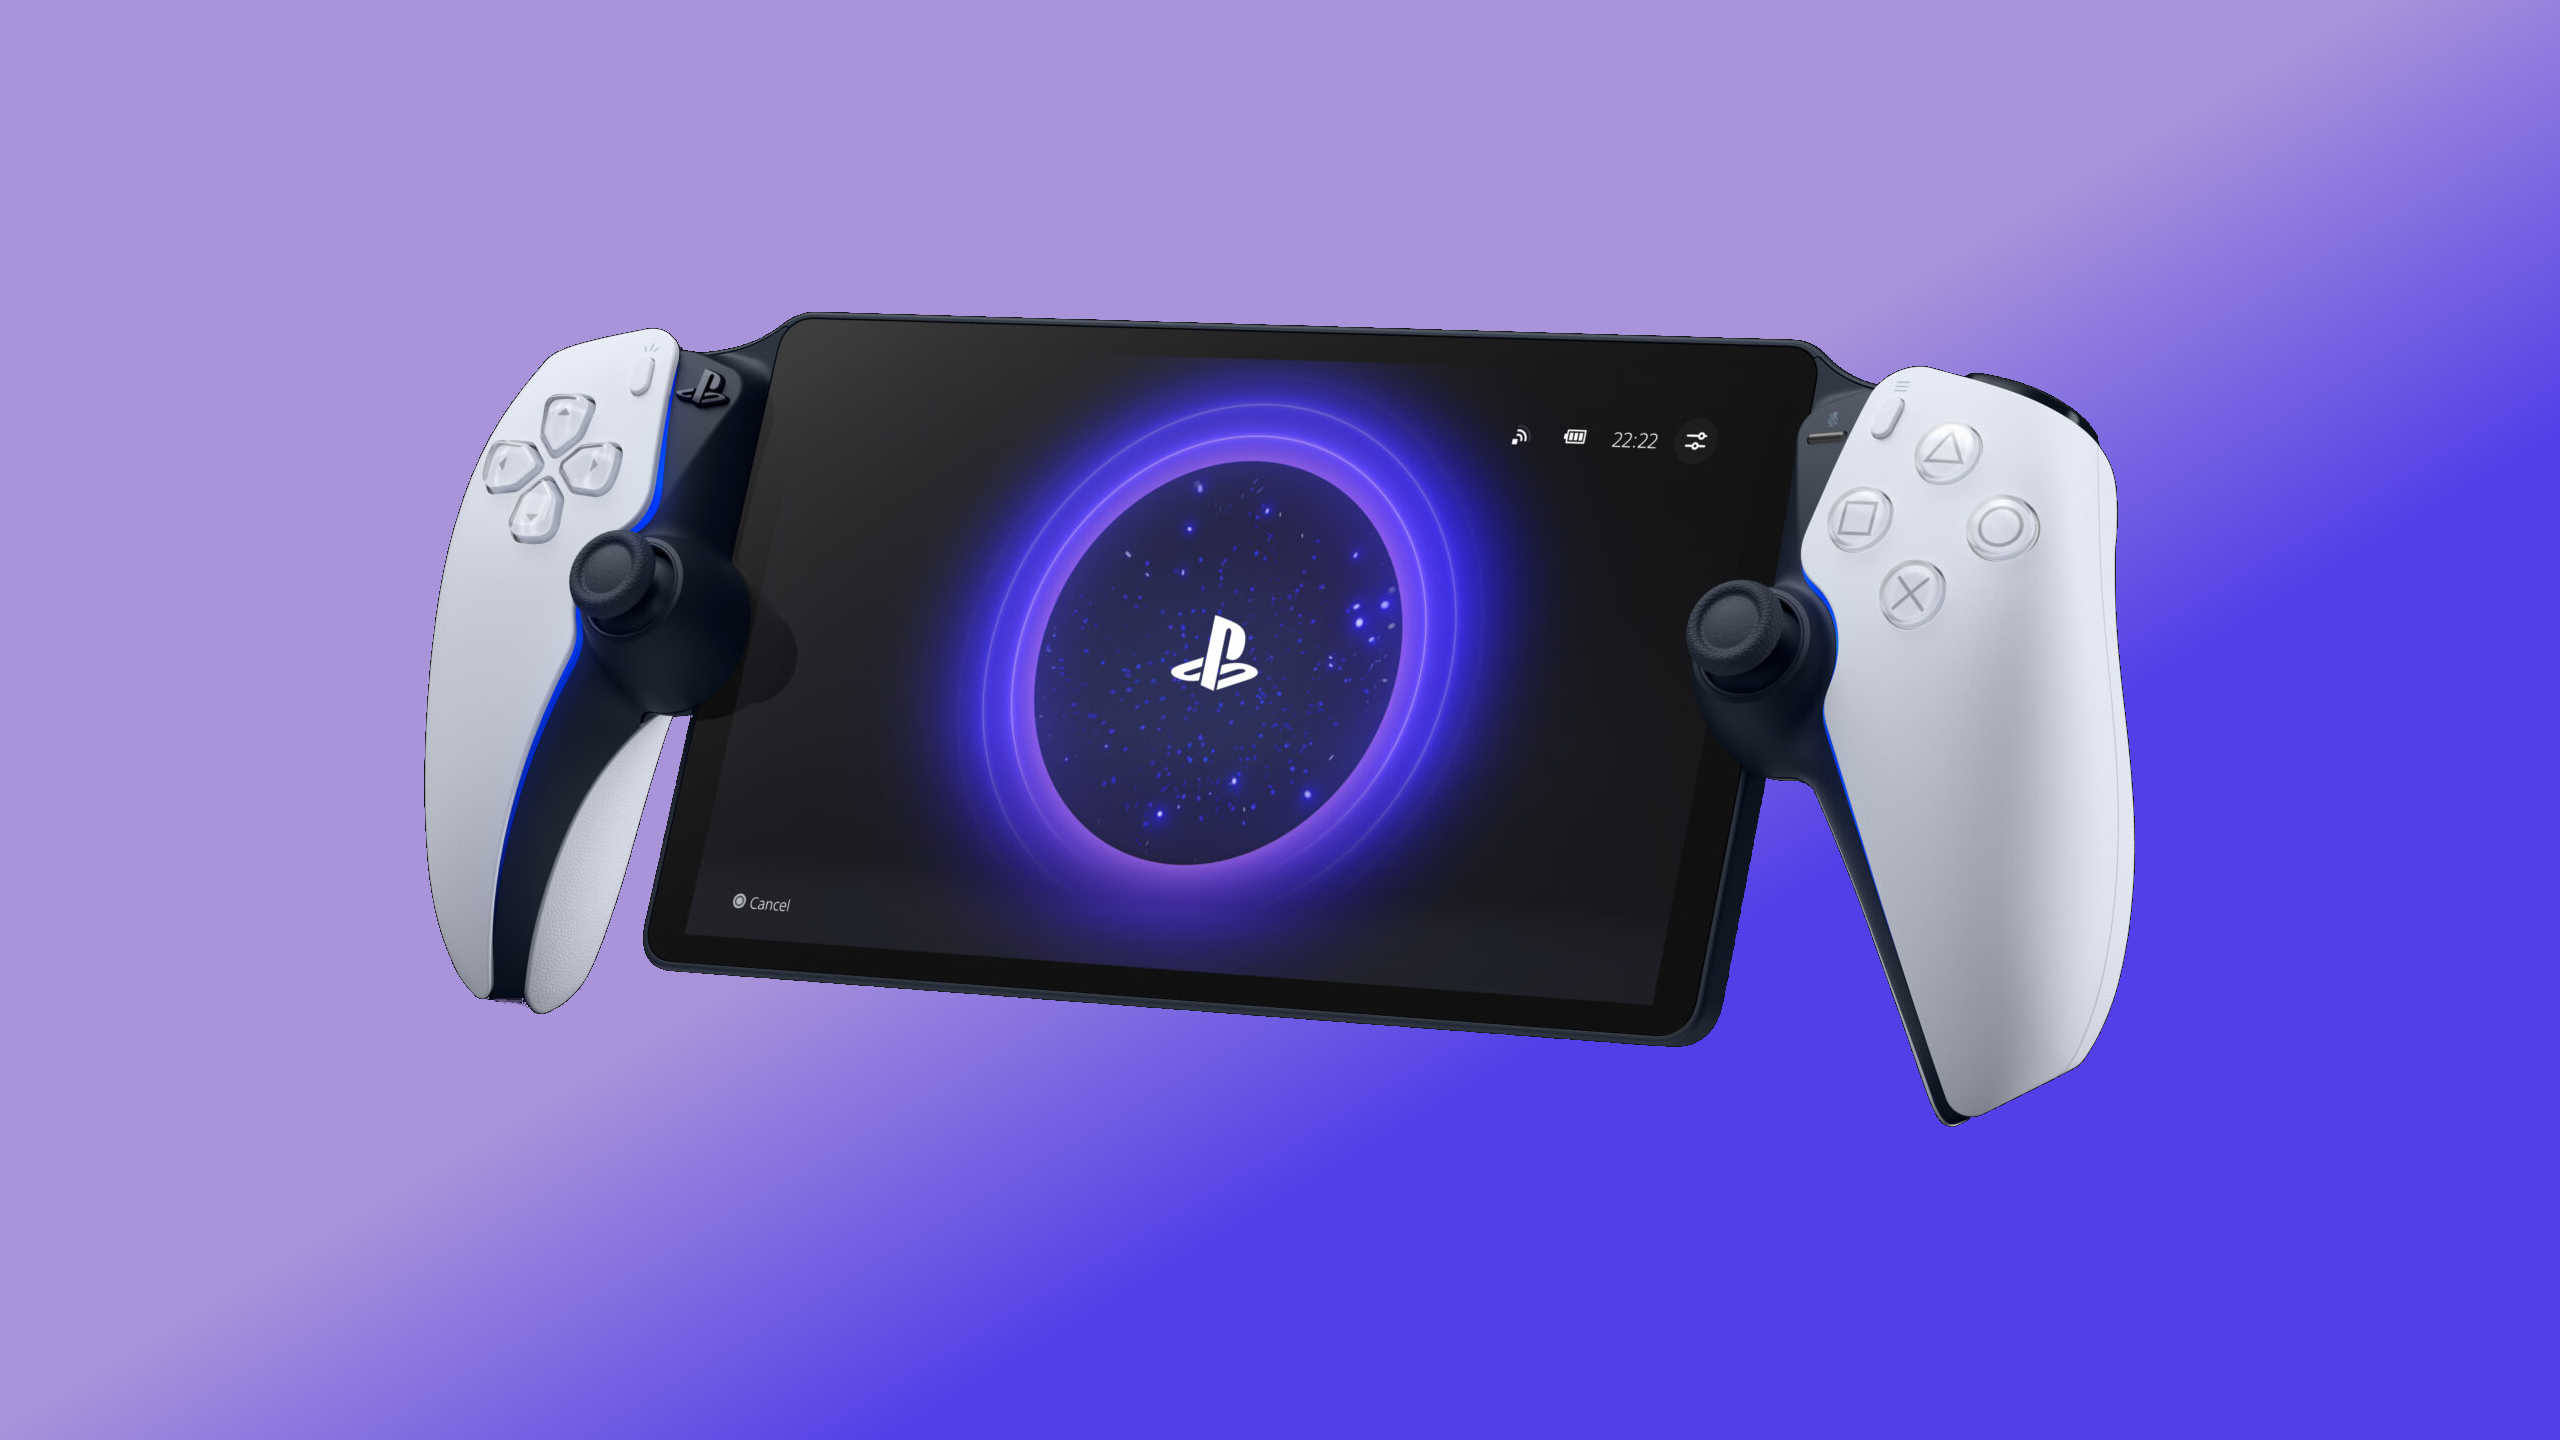 Project Q handheld gaming console is unveiled as PlayStation Portal